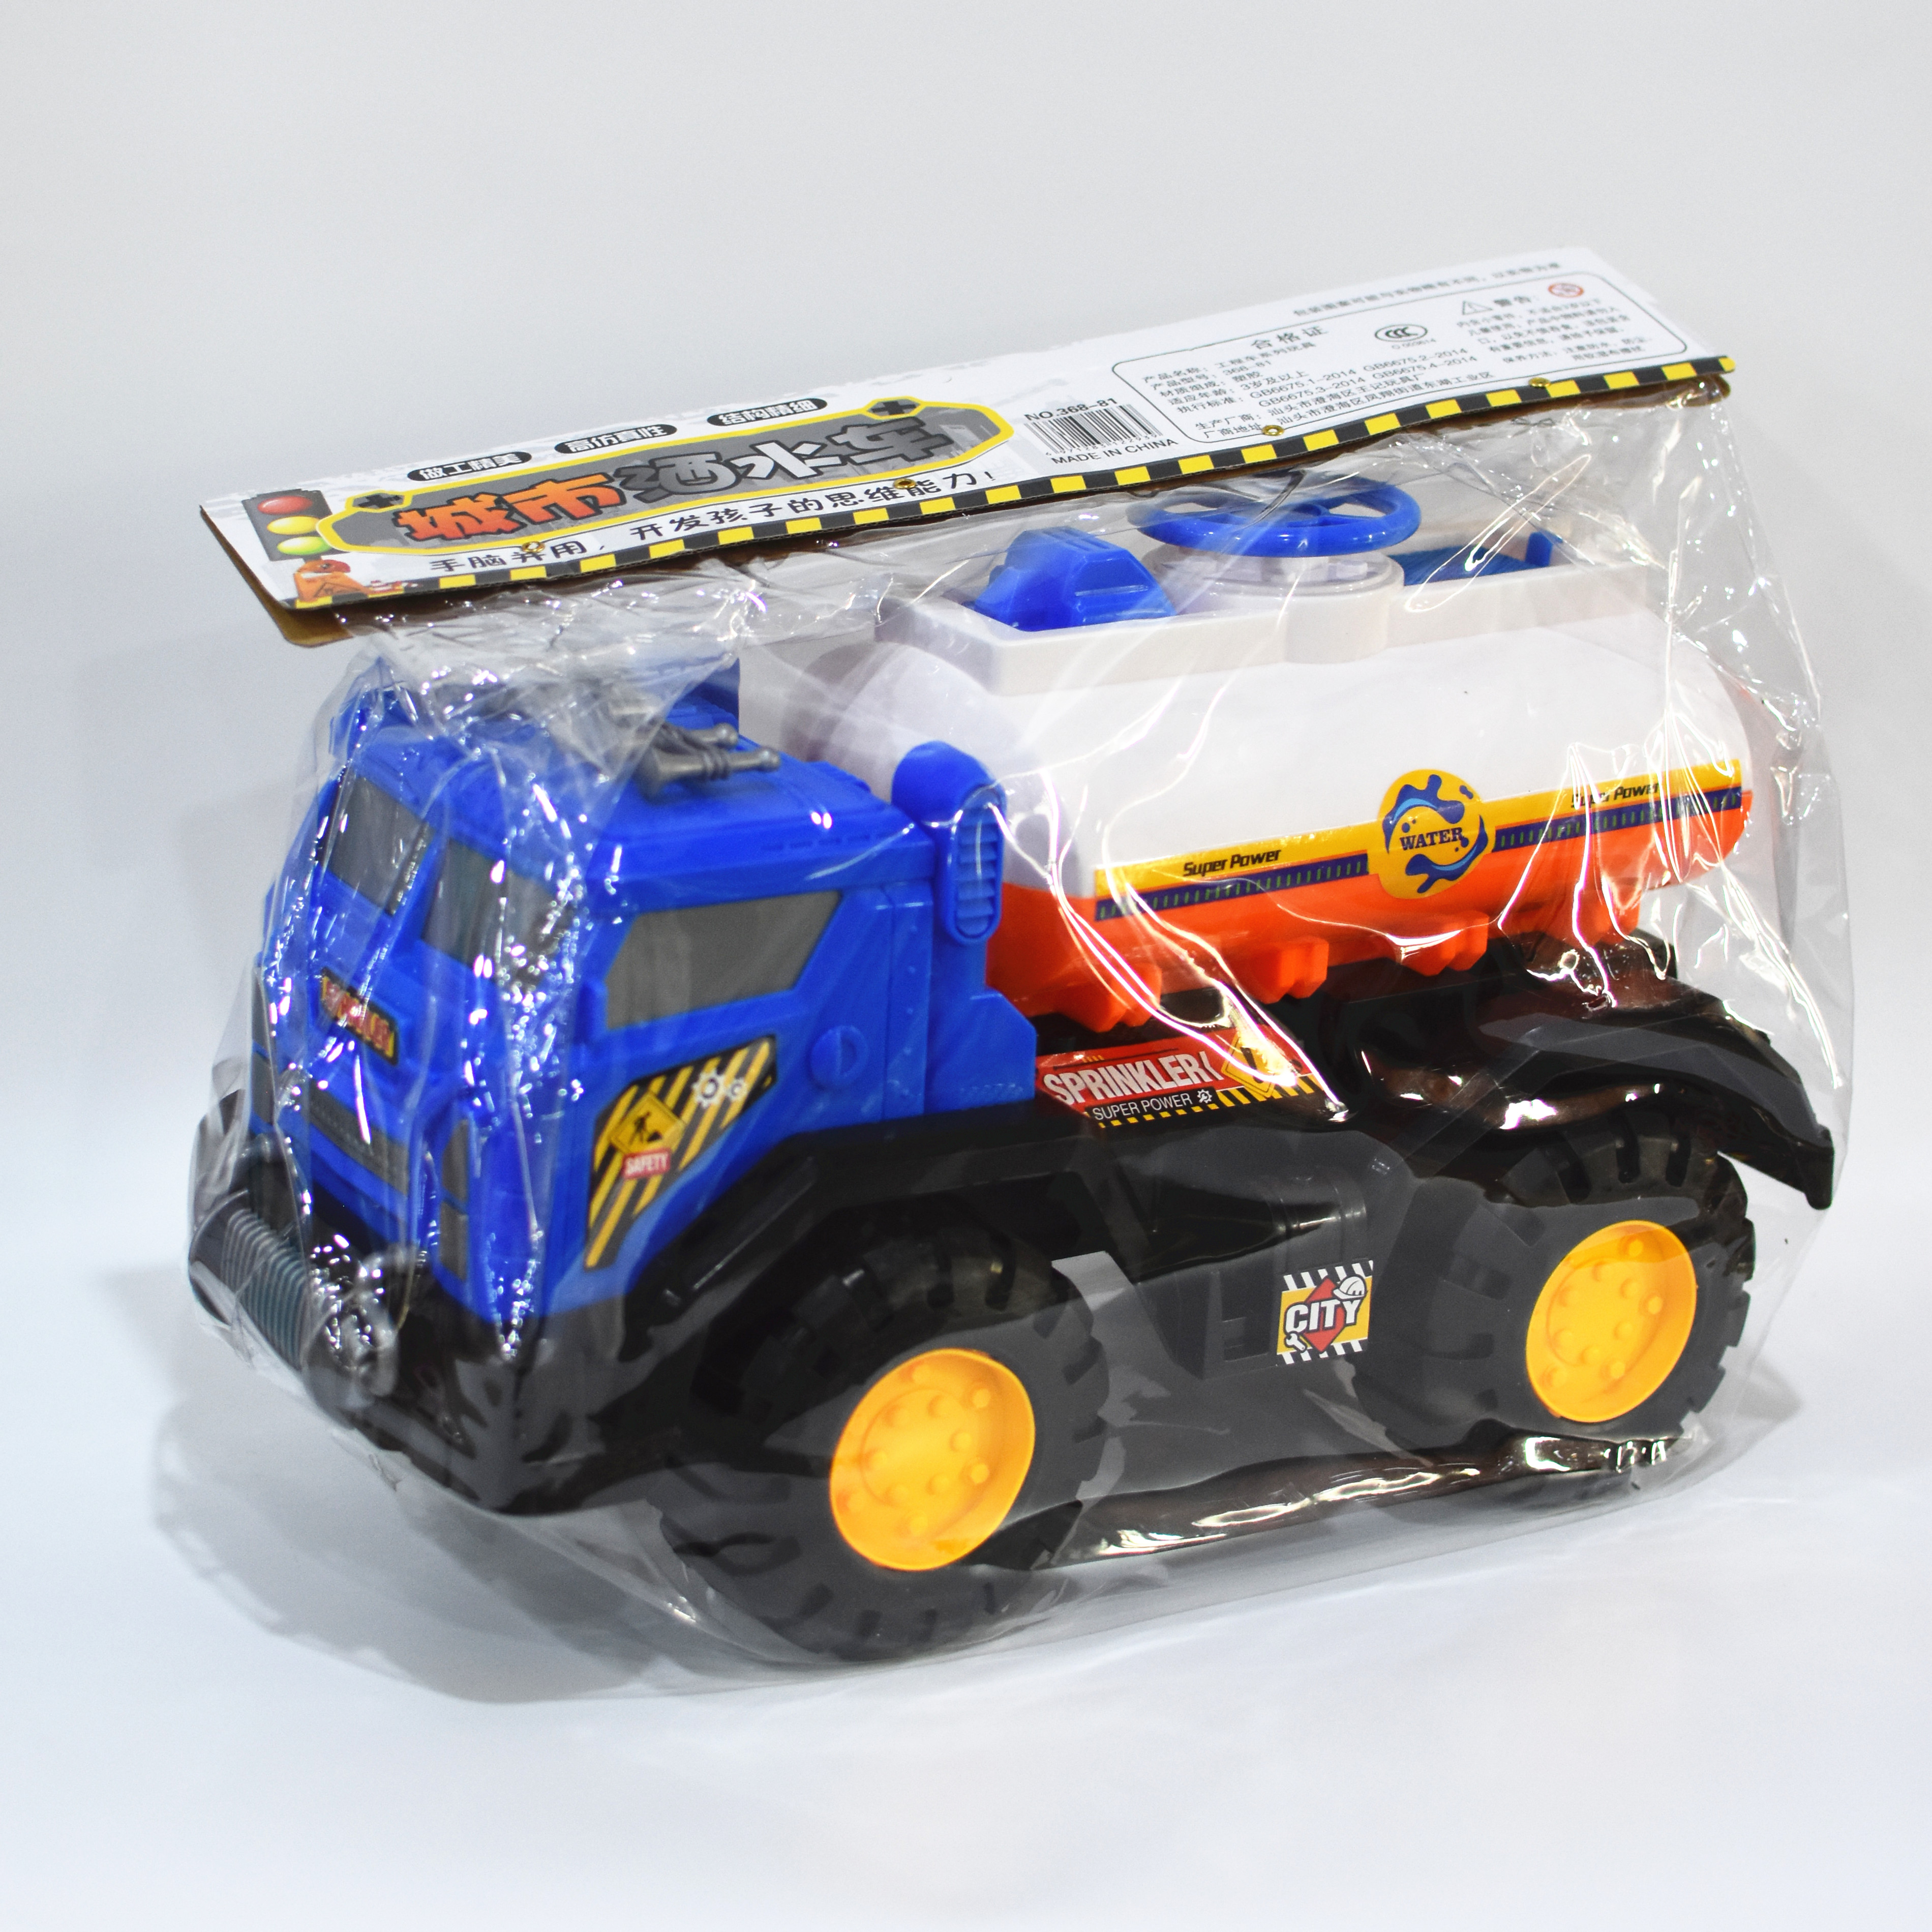 FREE WHEEL TRUCK TOY LY1361